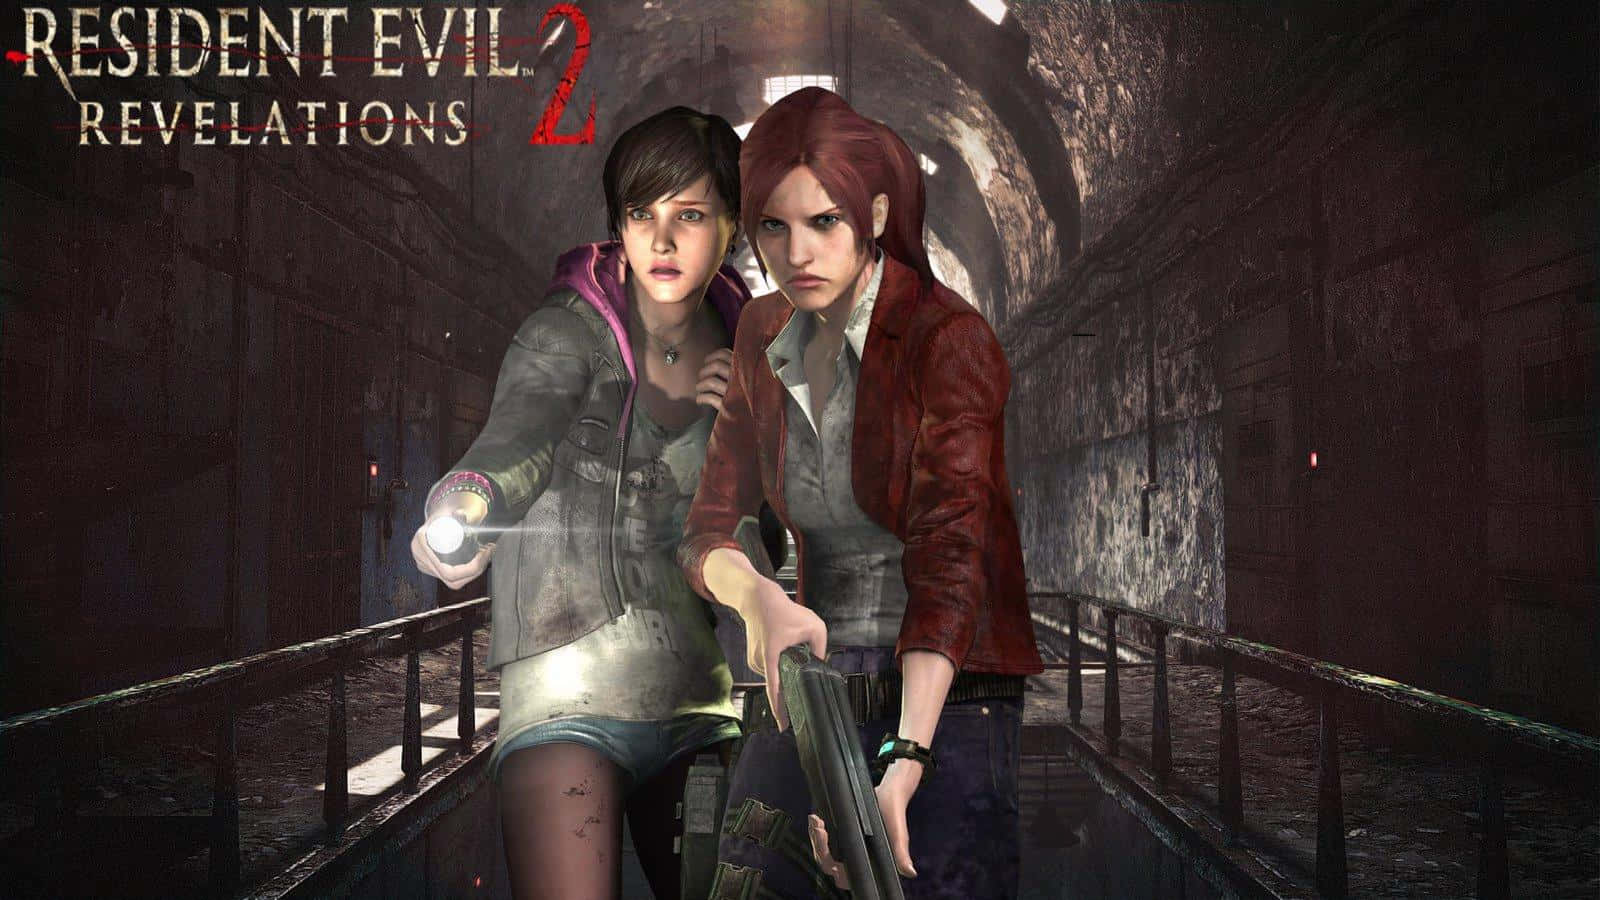 Claire Redfield and Moira Burton battle mutated creatures in Resident Evil Revelations 2 Wallpaper